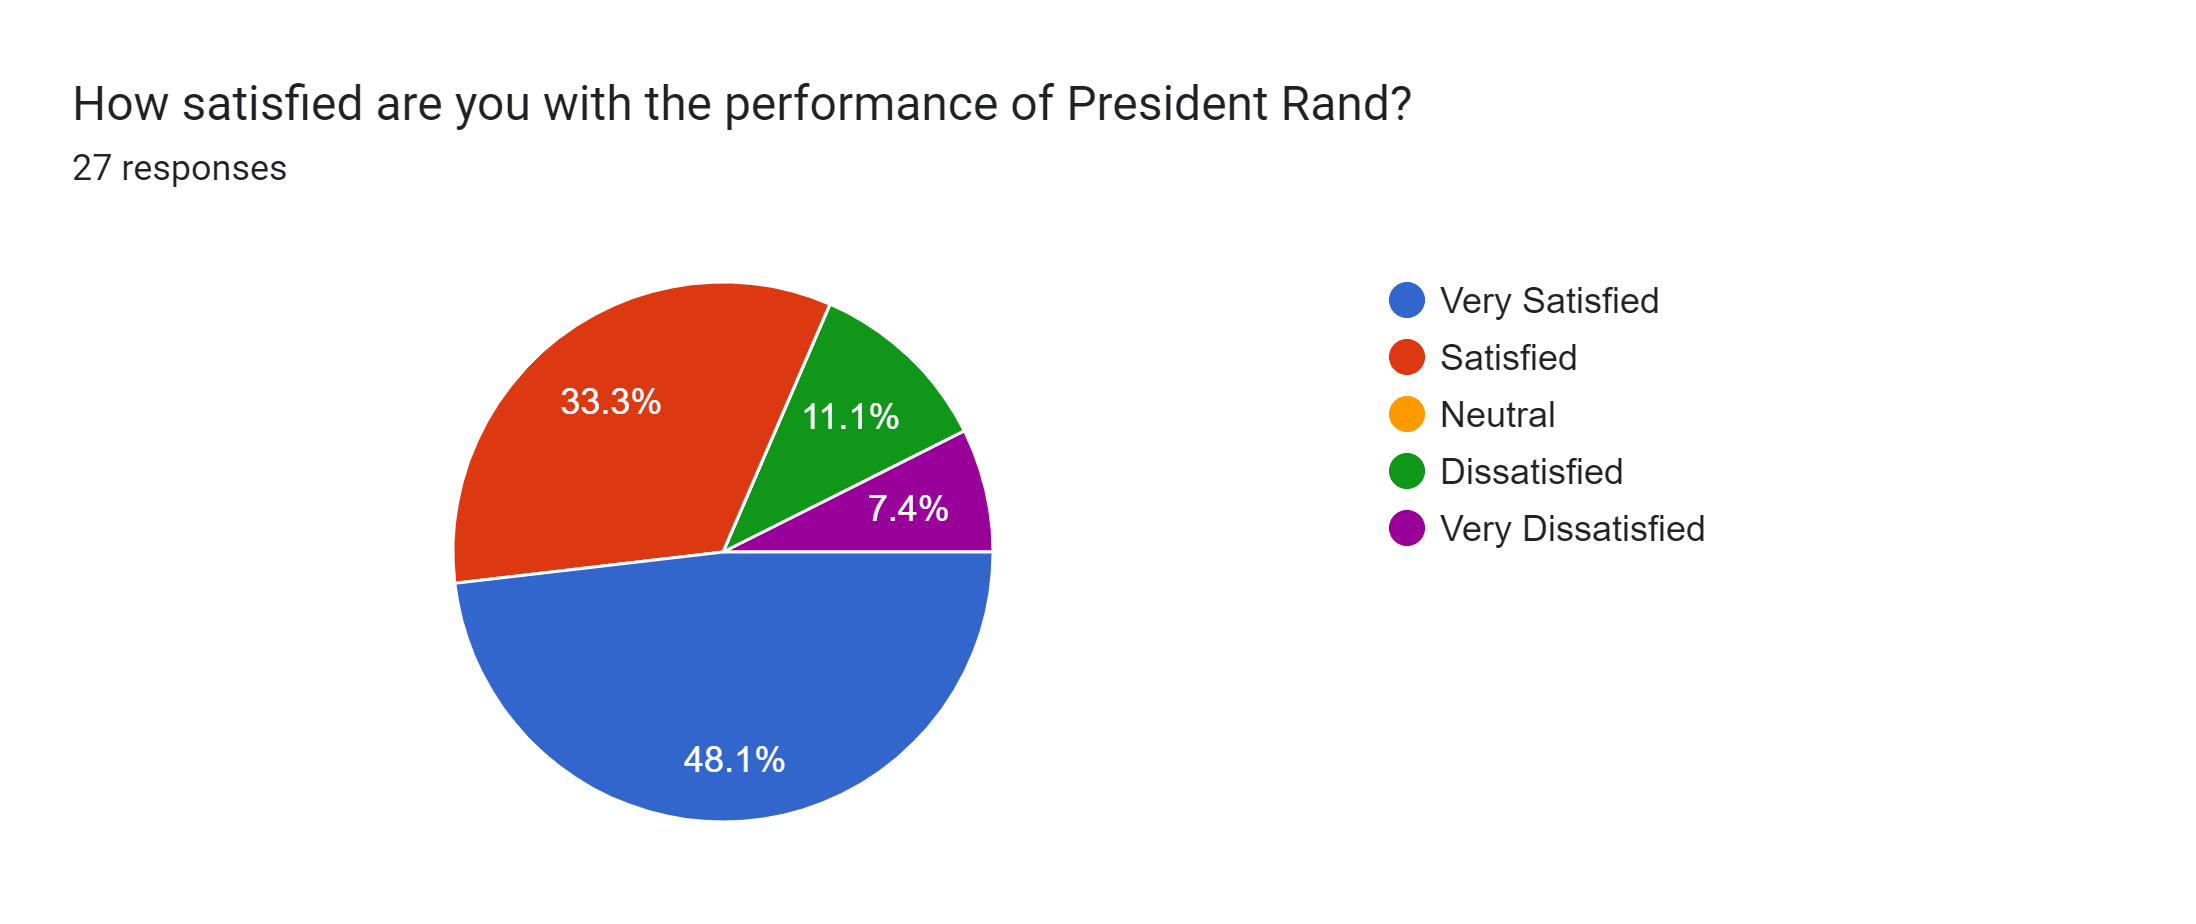 Forms response chart. Question title: How satisfied are you with the performance of President Rand?. Number of responses: 27 responses.